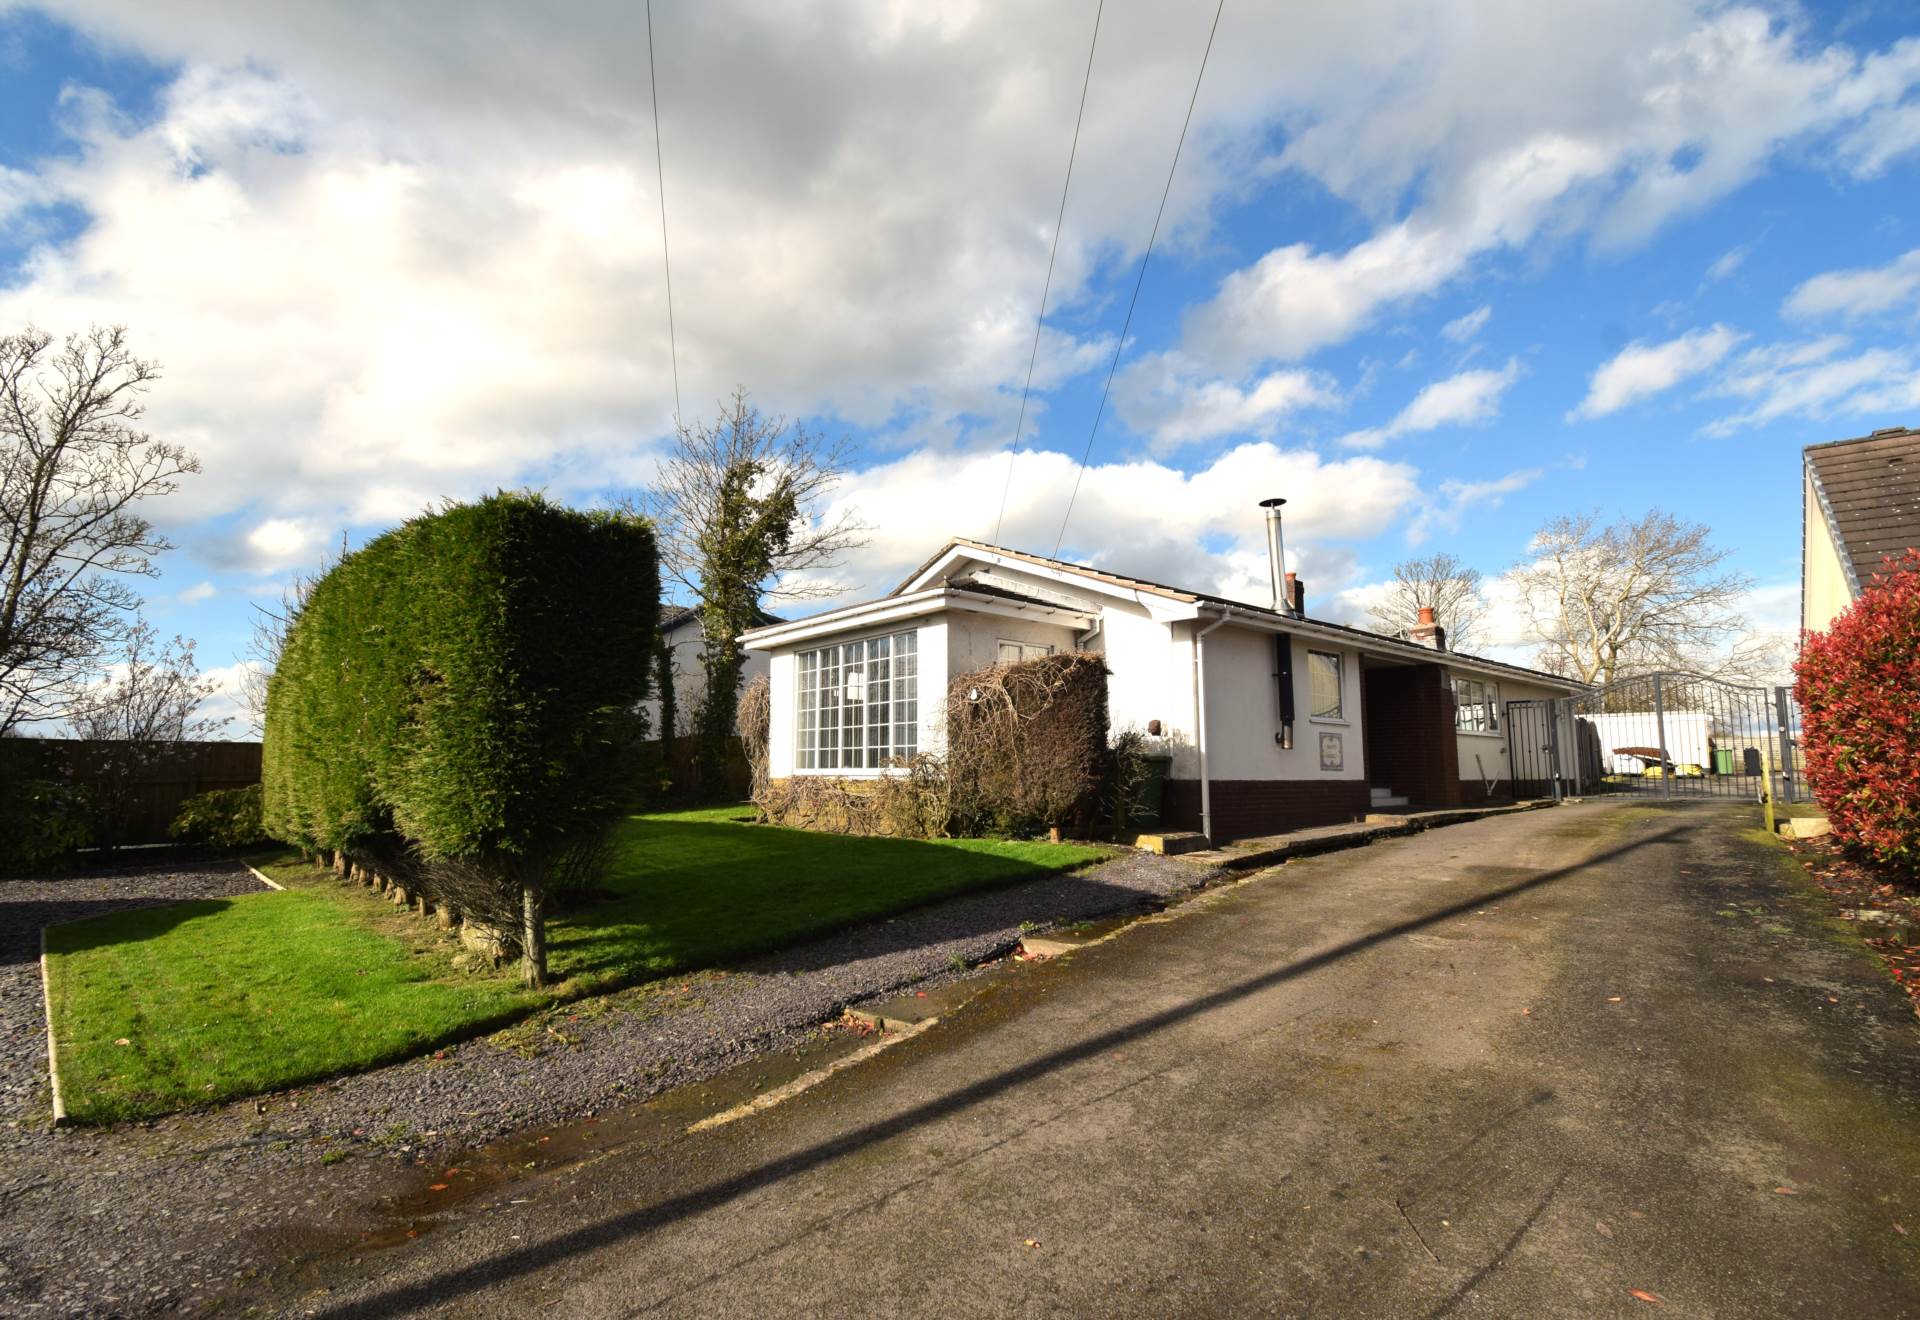 3 bed Detached bungalow for rent in Preston. From Mi Home Estate Agents